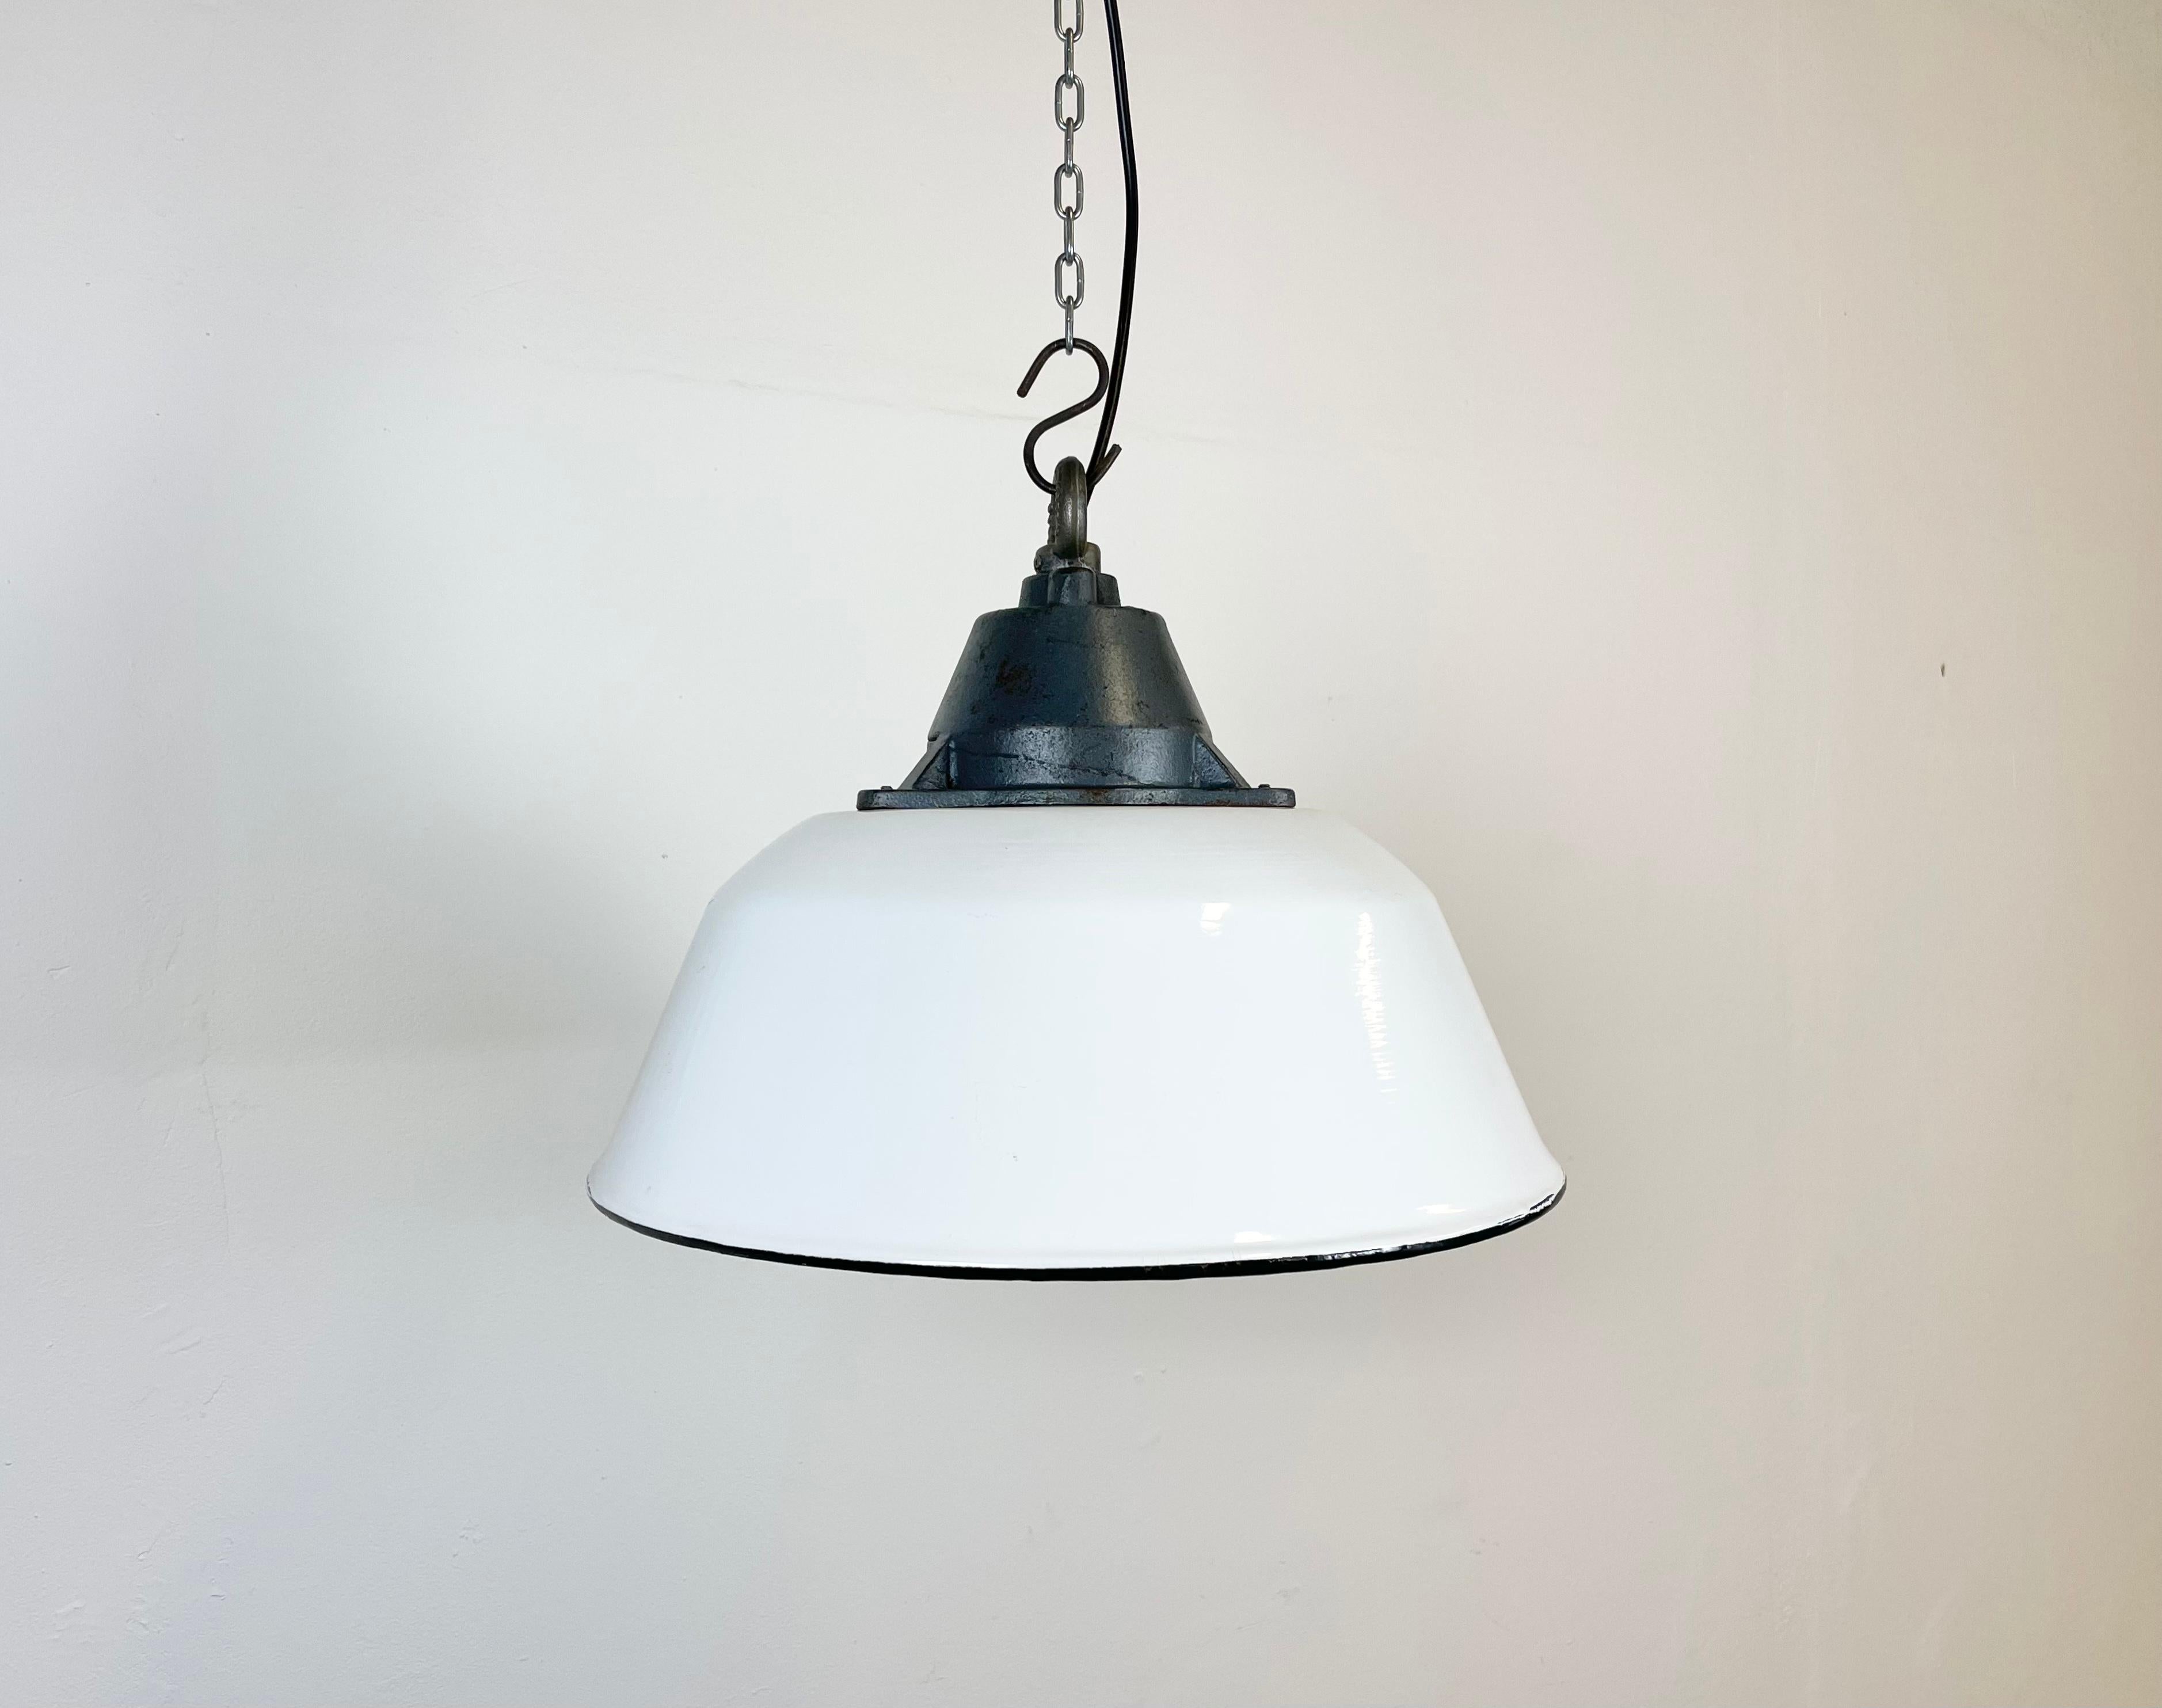 Industrial hanging lamp manufactured by Szarvasi Vas - Fém in Hungary during the 1960s. It features a white enamel shade, white enamel interior and grey cast iron top. New porcelain socket requires E 27 light bulbs. New wire. The diameter of the